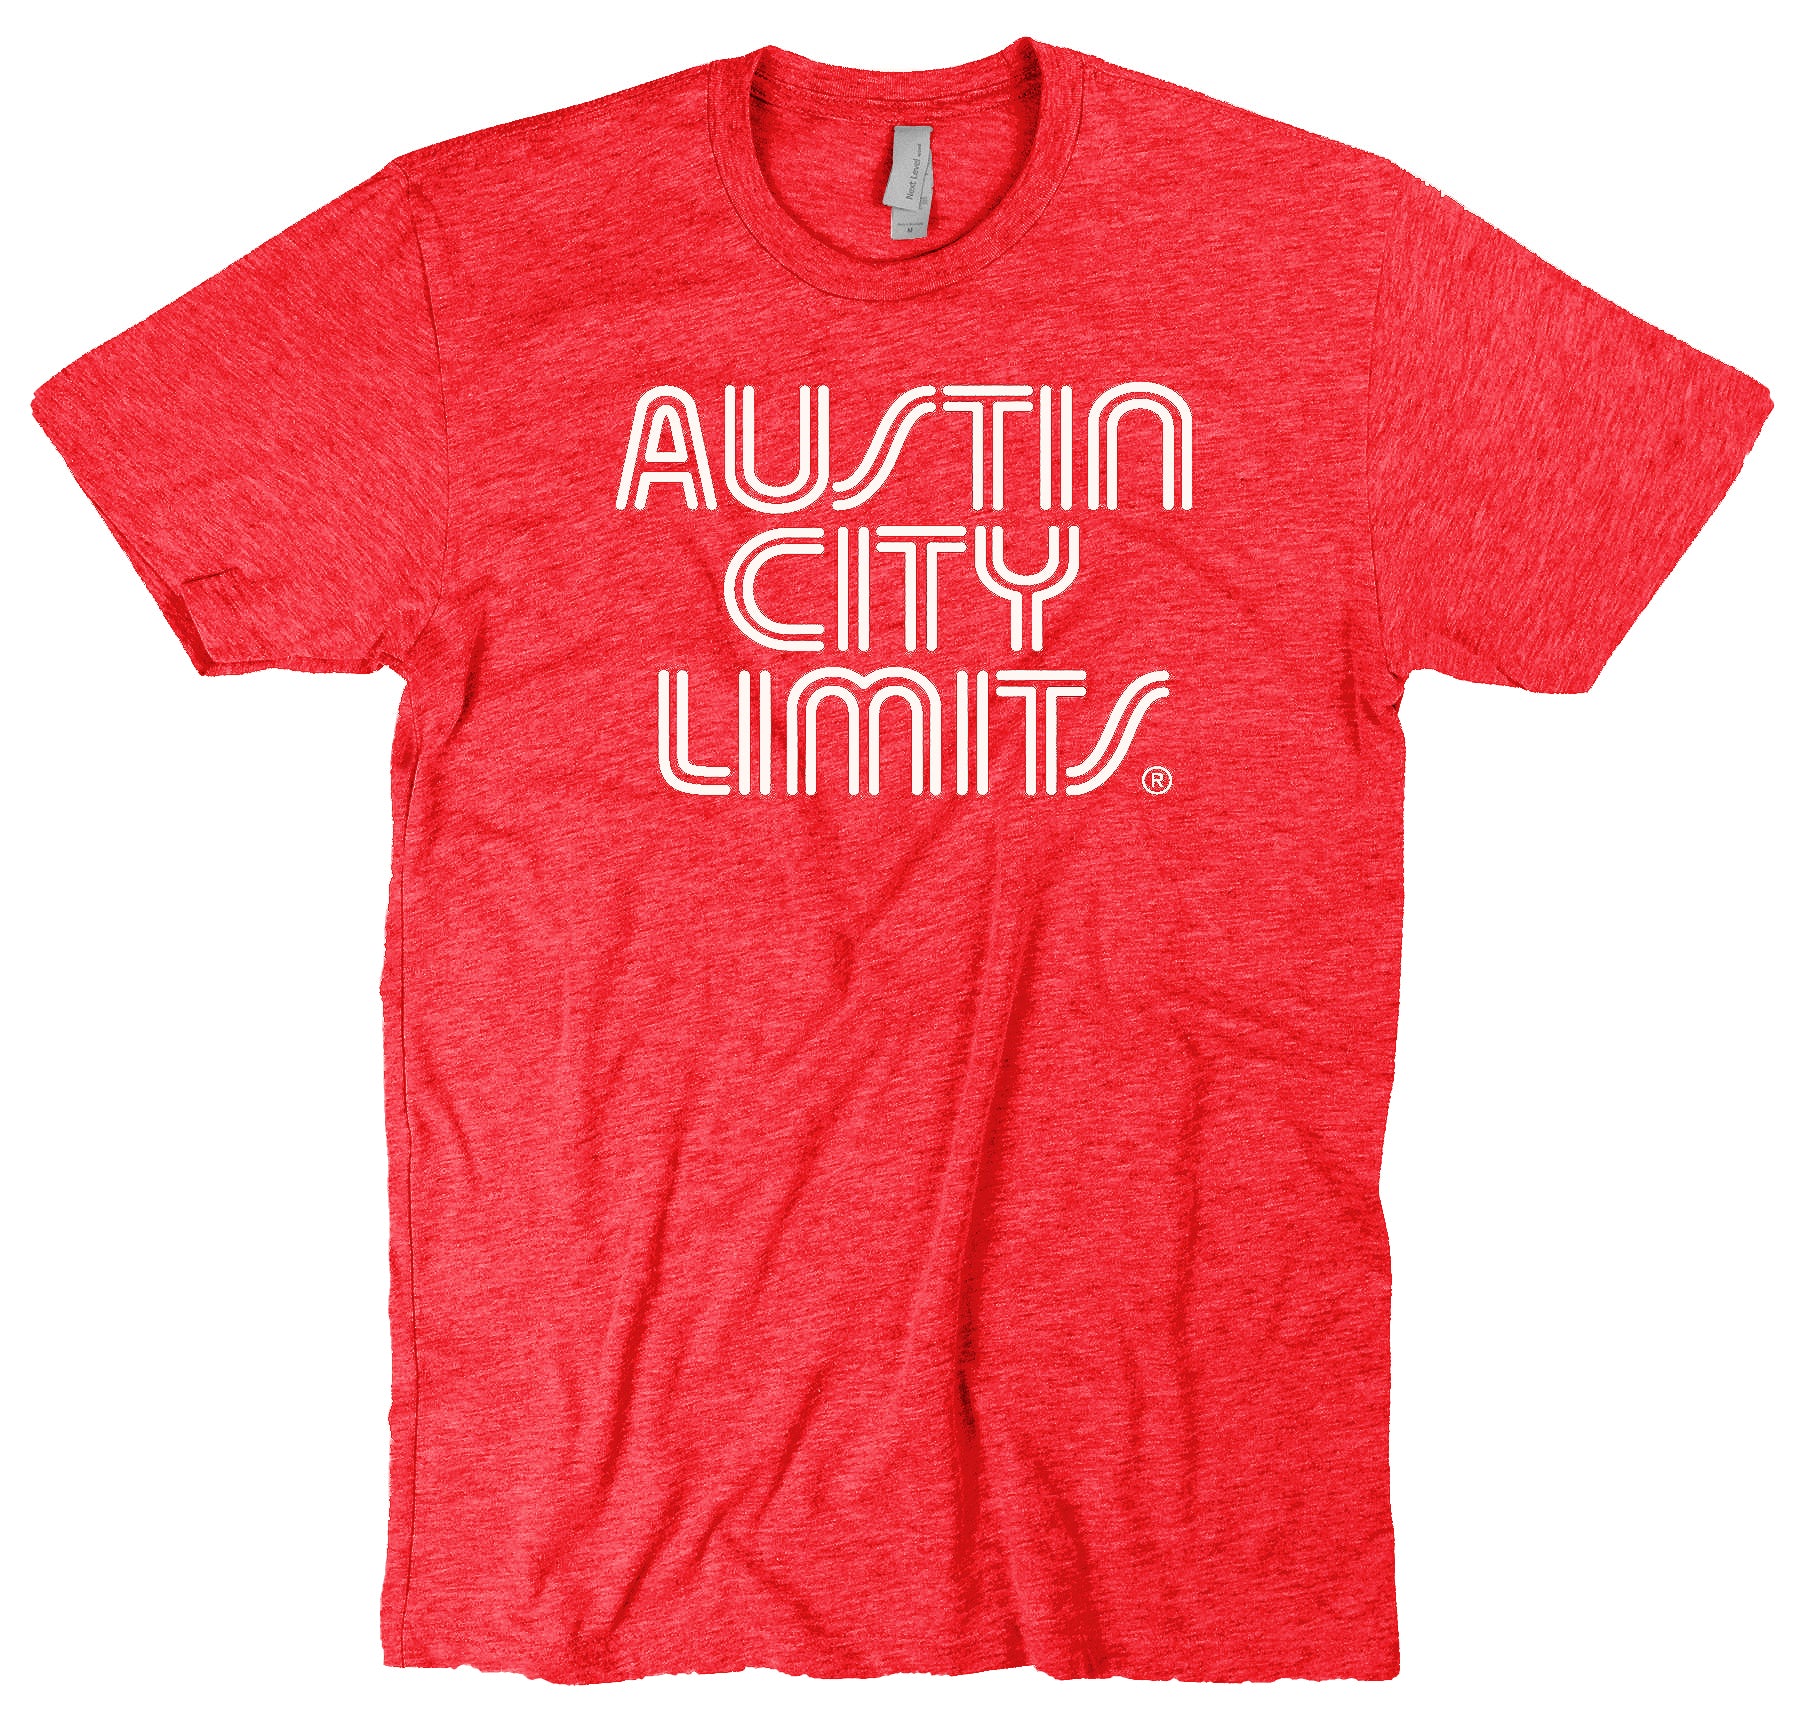 Vintage Red Unisex T-Shirt with White ACL Logo